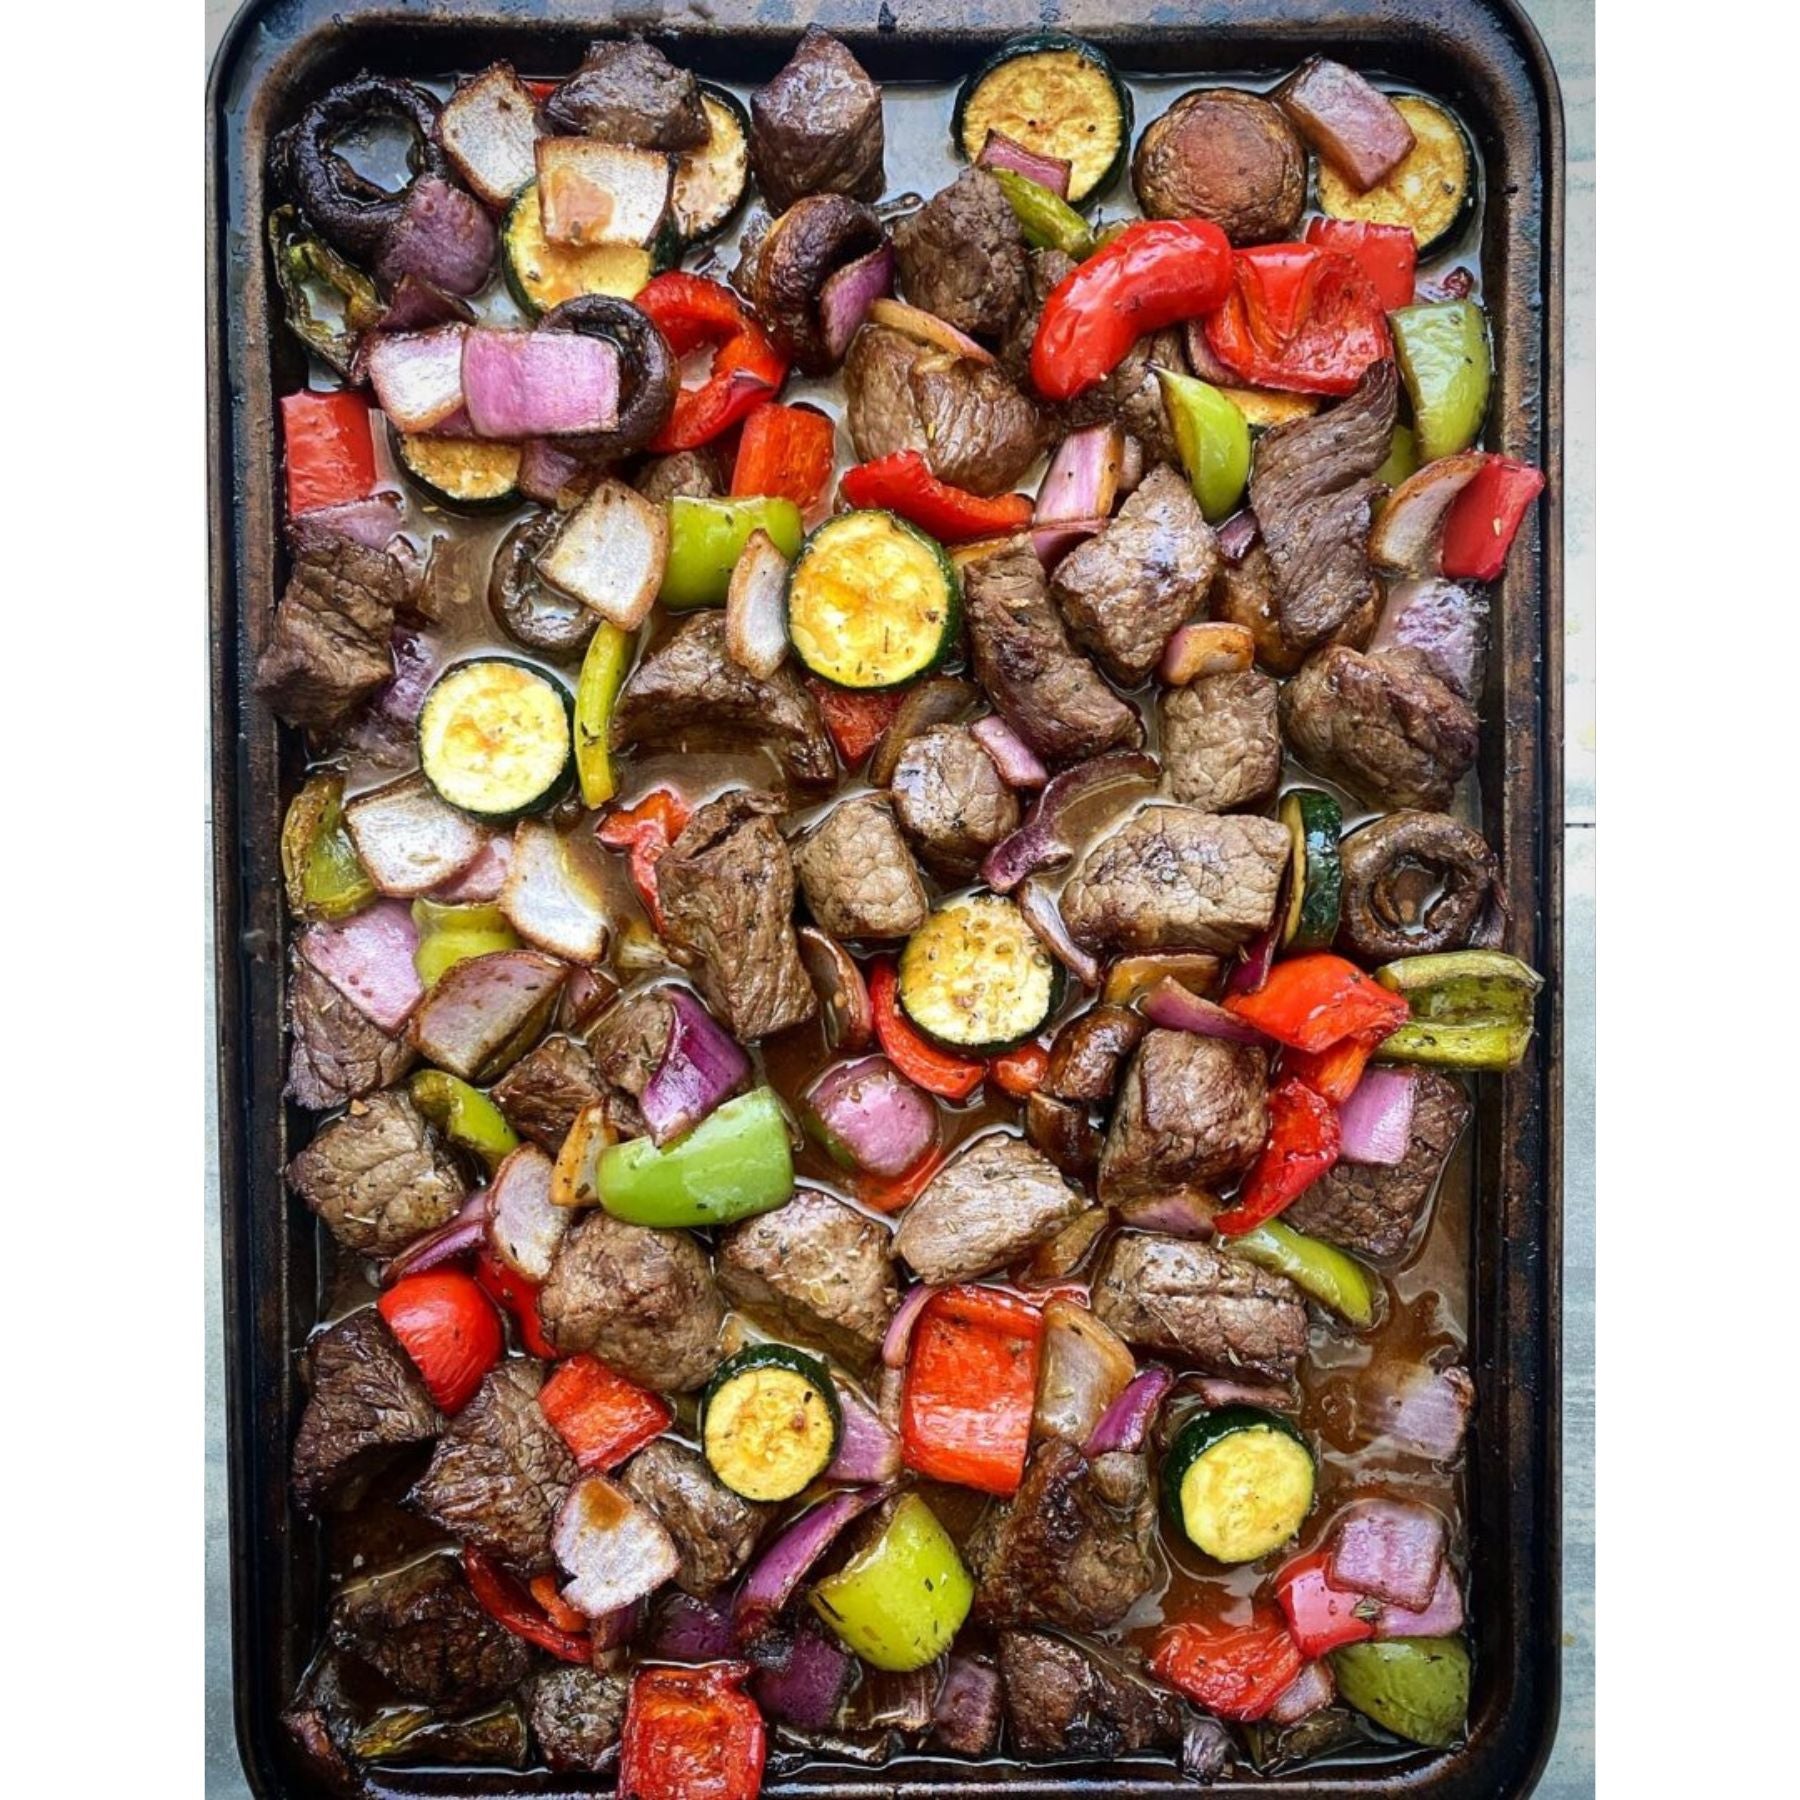 Beef unkabobs: no skewers needed. Beef chunks with colorful vegetables baked for incredible ease and flavor.